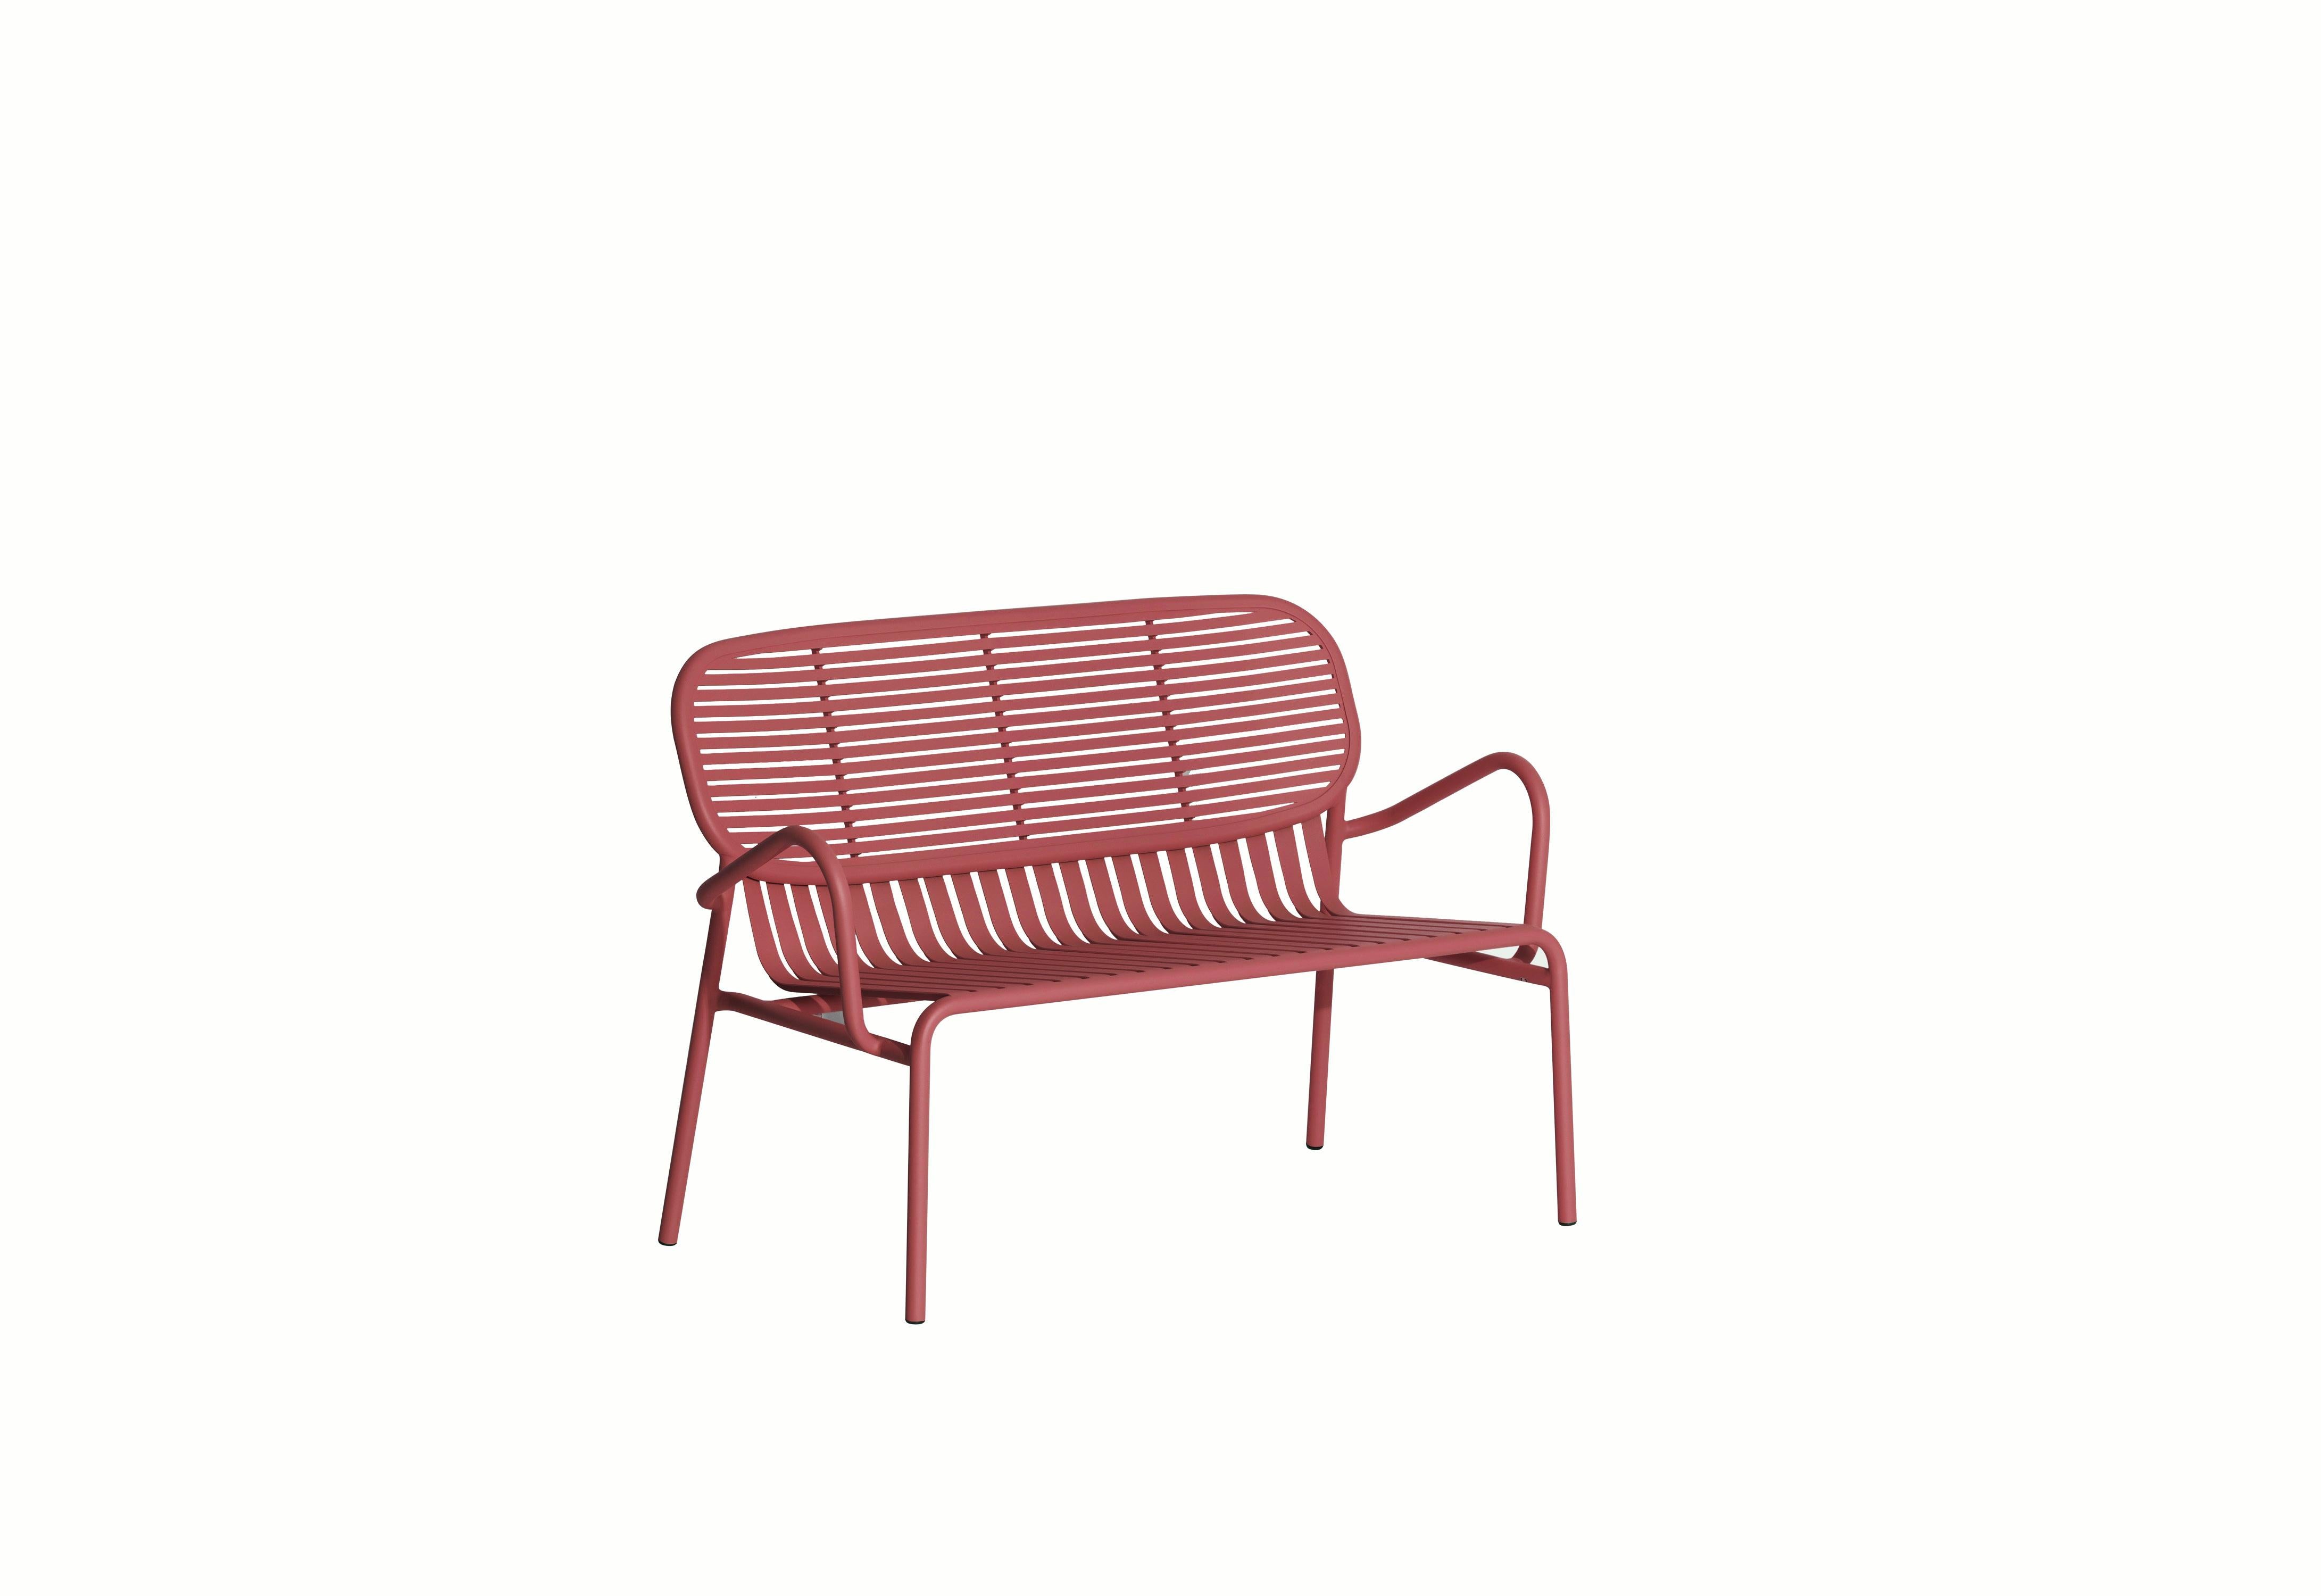 Petite Friture Week-End Sofa in Terracotta Aluminium by Studio BrichetZiegler, 2017

The week-end collection is a full range of outdoor furniture, in aluminium grained epoxy paint, matt finish, that includes 18 functions and 8 colours for the